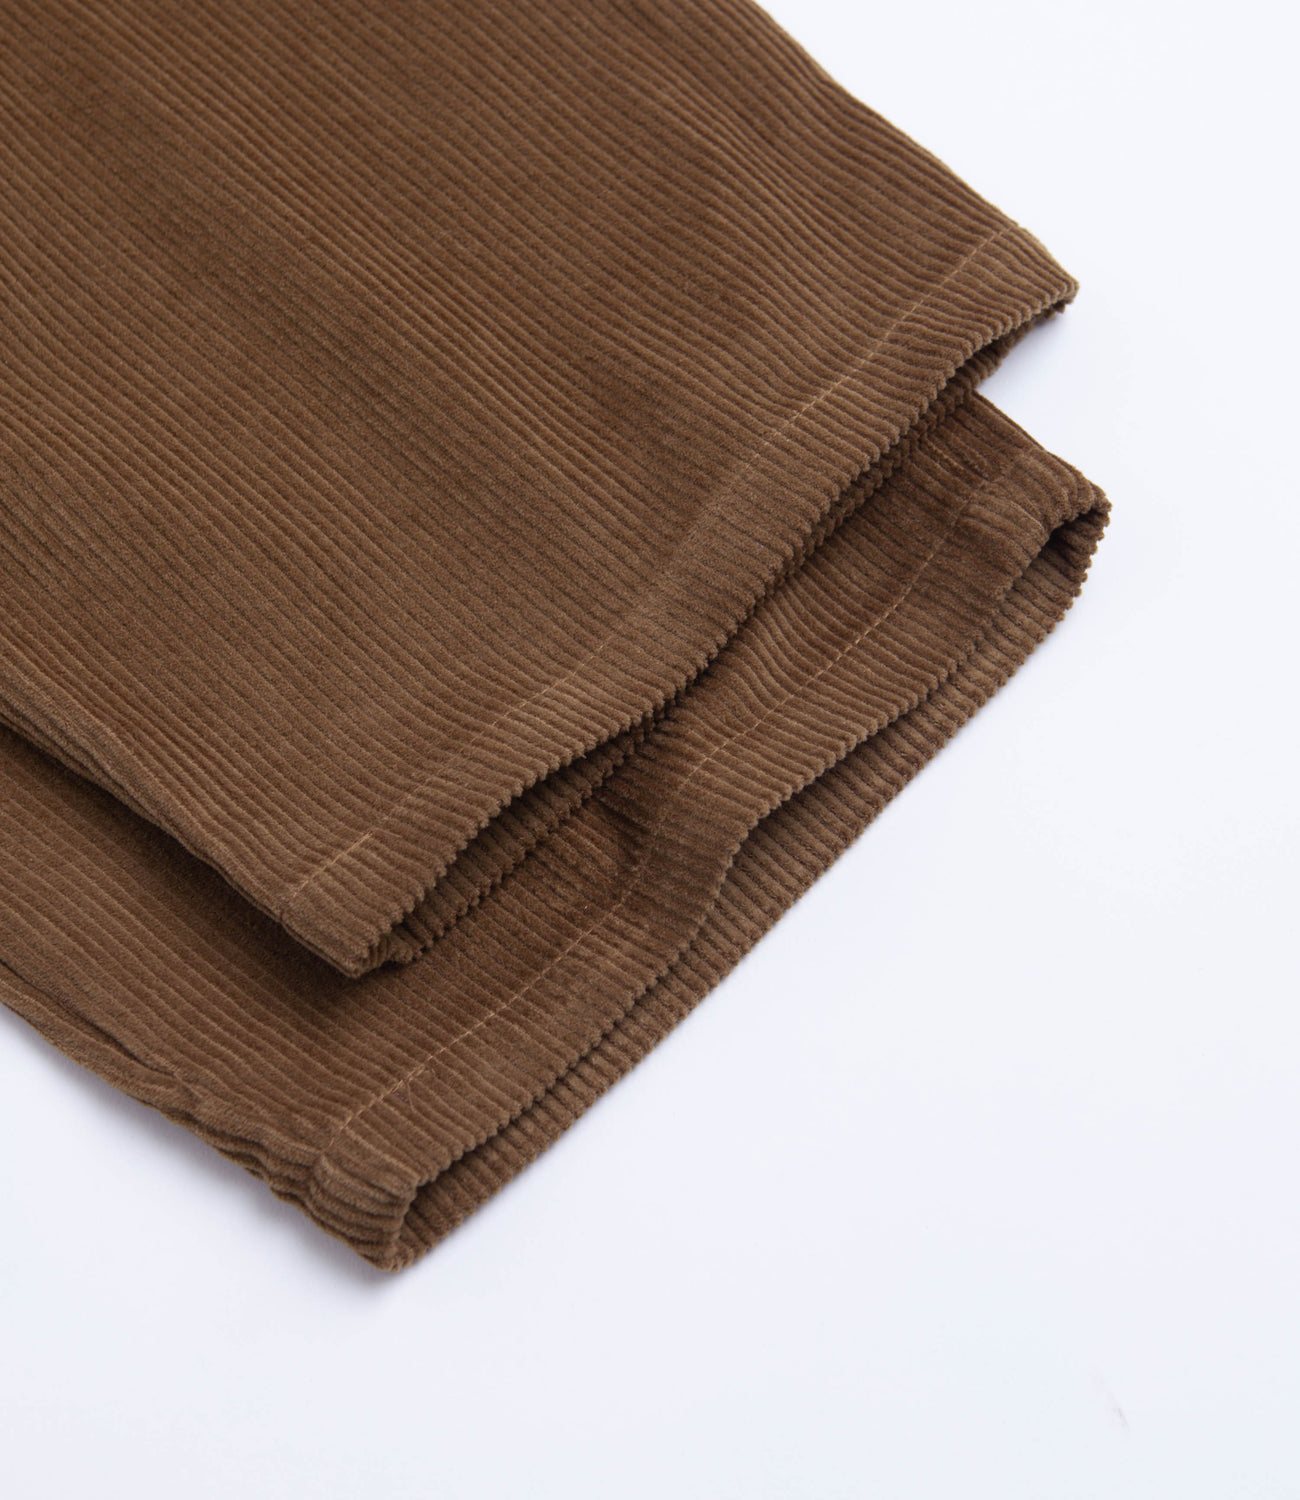 Heavy brown Brisbane Moss cords – Permanent Style